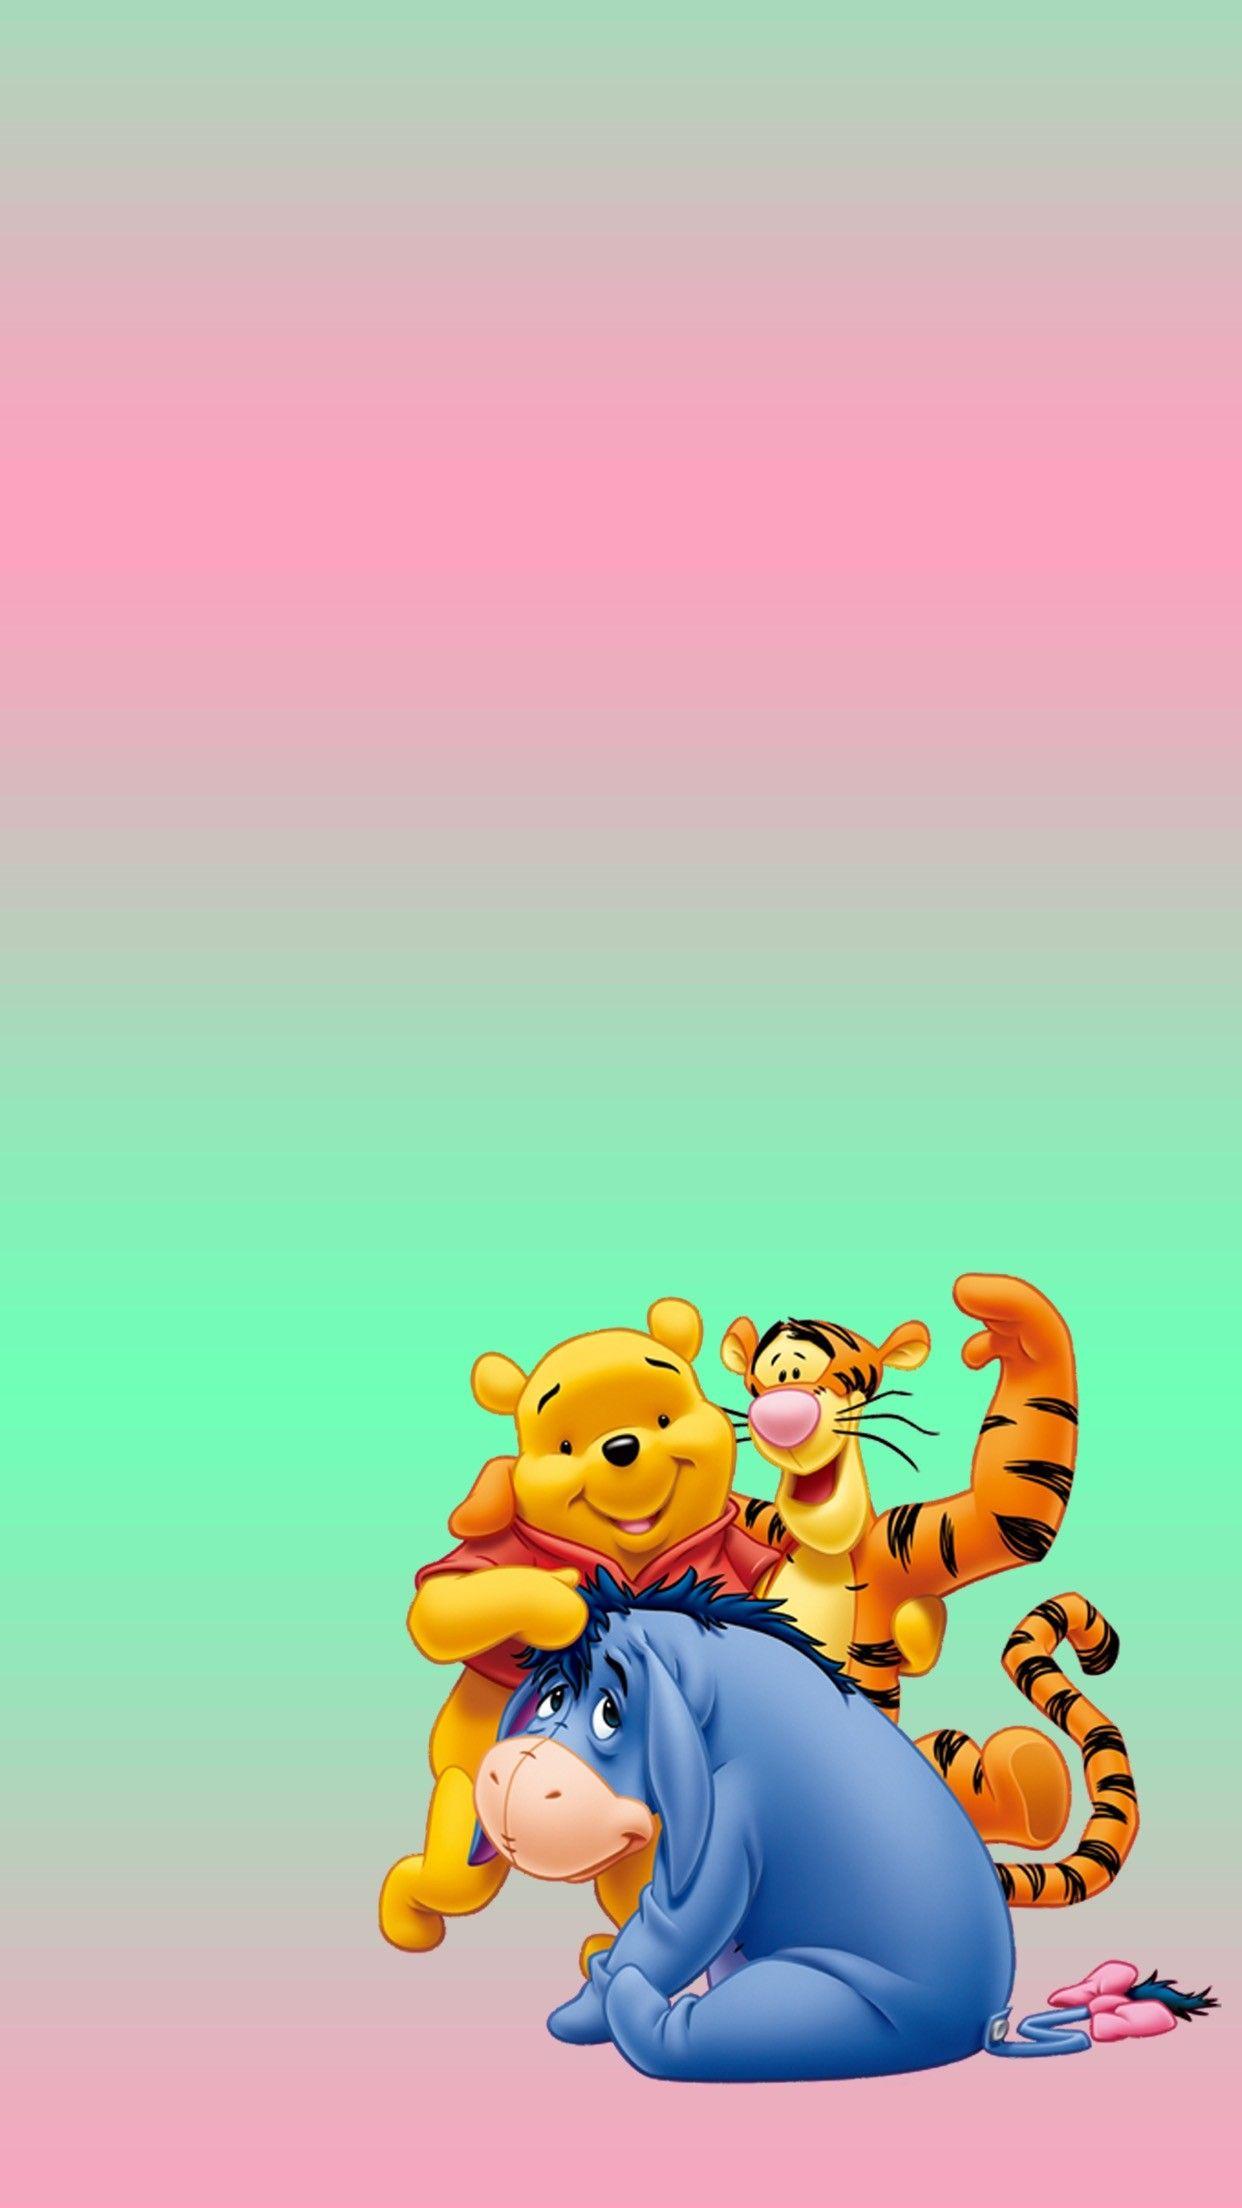 Winnie the Pooh iPhone Wallpapers - Top Free Winnie the Pooh iPhone